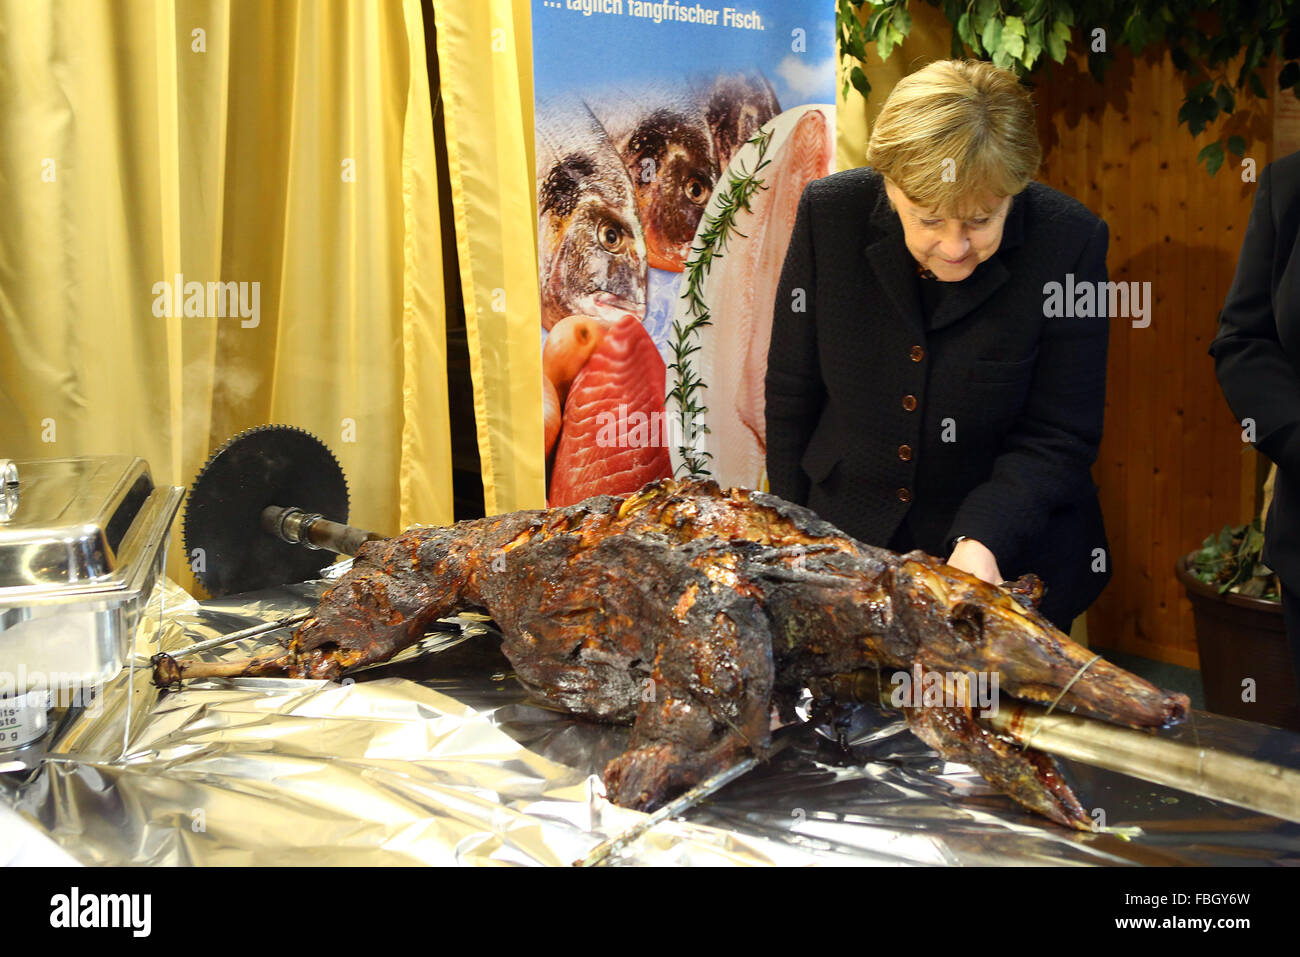 Trinwillershagen, Germany. 15th Jan, 2016. German Chancellor Angela Merkel (CDU) is helping herself to a bite from a grilled pork during the traditional New Year's reception of the county council of Western Pomerania in Trinwillershagen, Germany, 15 January 2016. Merkel has been representing her Stralsund-Greifswald-Ruegen-Western Pomerania constituency in the German Bundestag with a direct mandate since 1990. Photo: Ove Arscholl/dpa/Alamy Live News Stock Photo